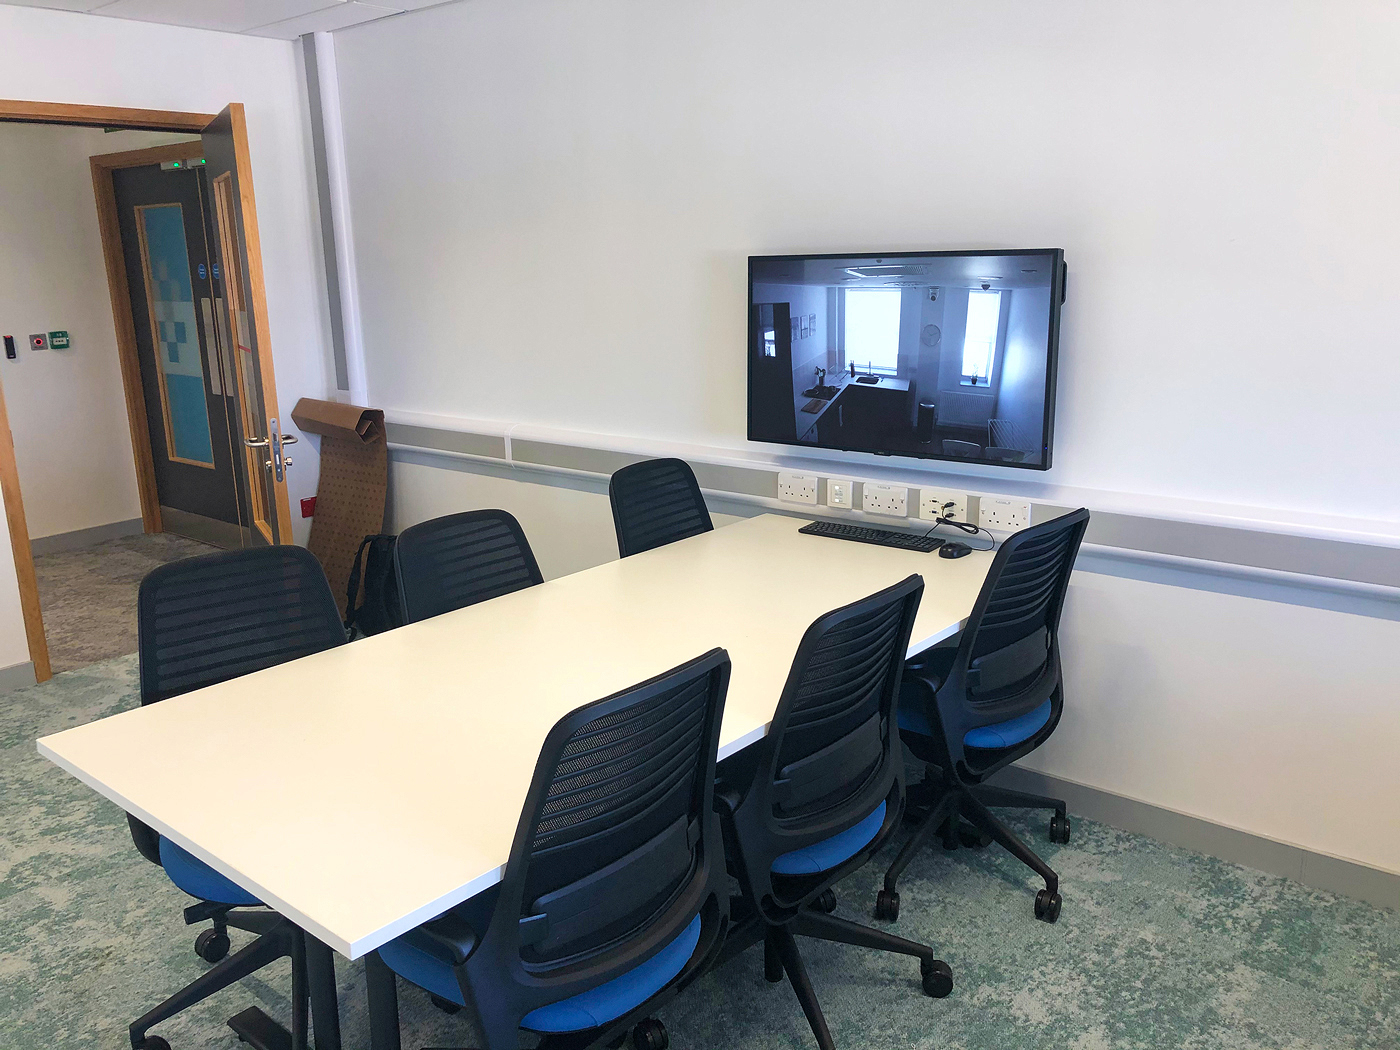 Thumbnail - NAV Pro AVoIP encoders and decoders facilitate observation of interview room activities on the flexible classrooms' projection systems. The ProDSP audio processor and speakers facilitate two-way communication with each collaboration pod.